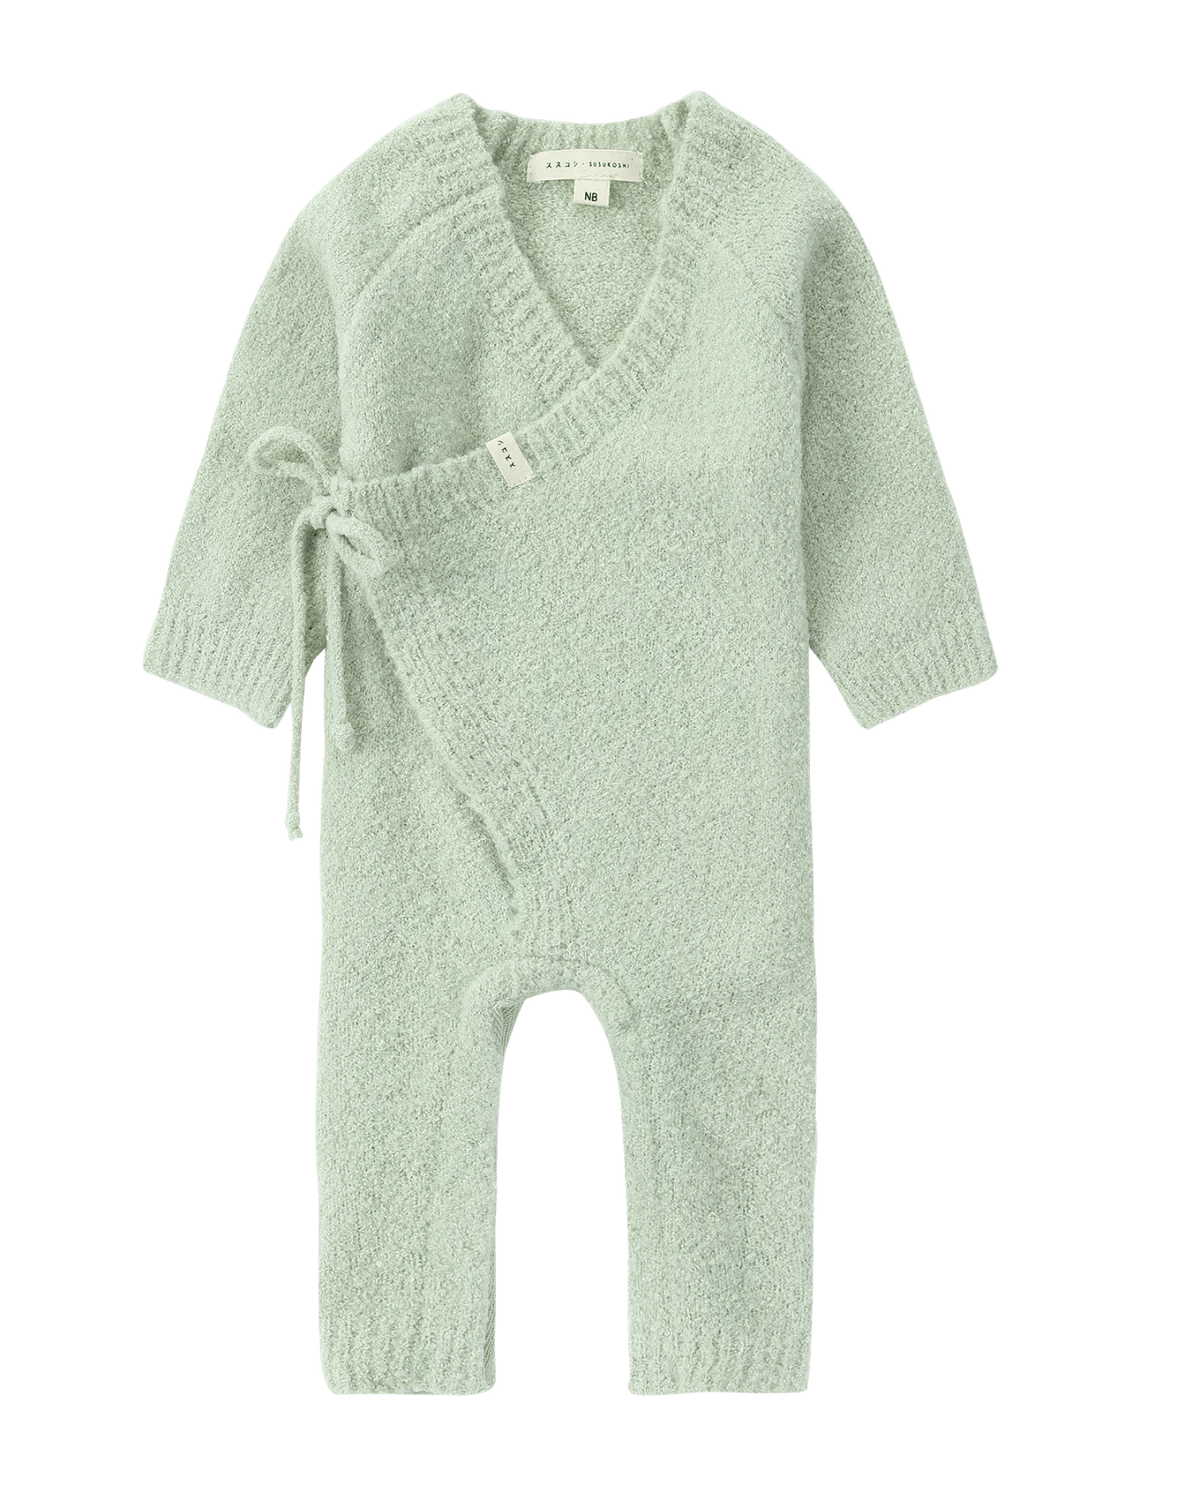 Boucle Baby Kimono Overall Suit In Sage by Susukoshi